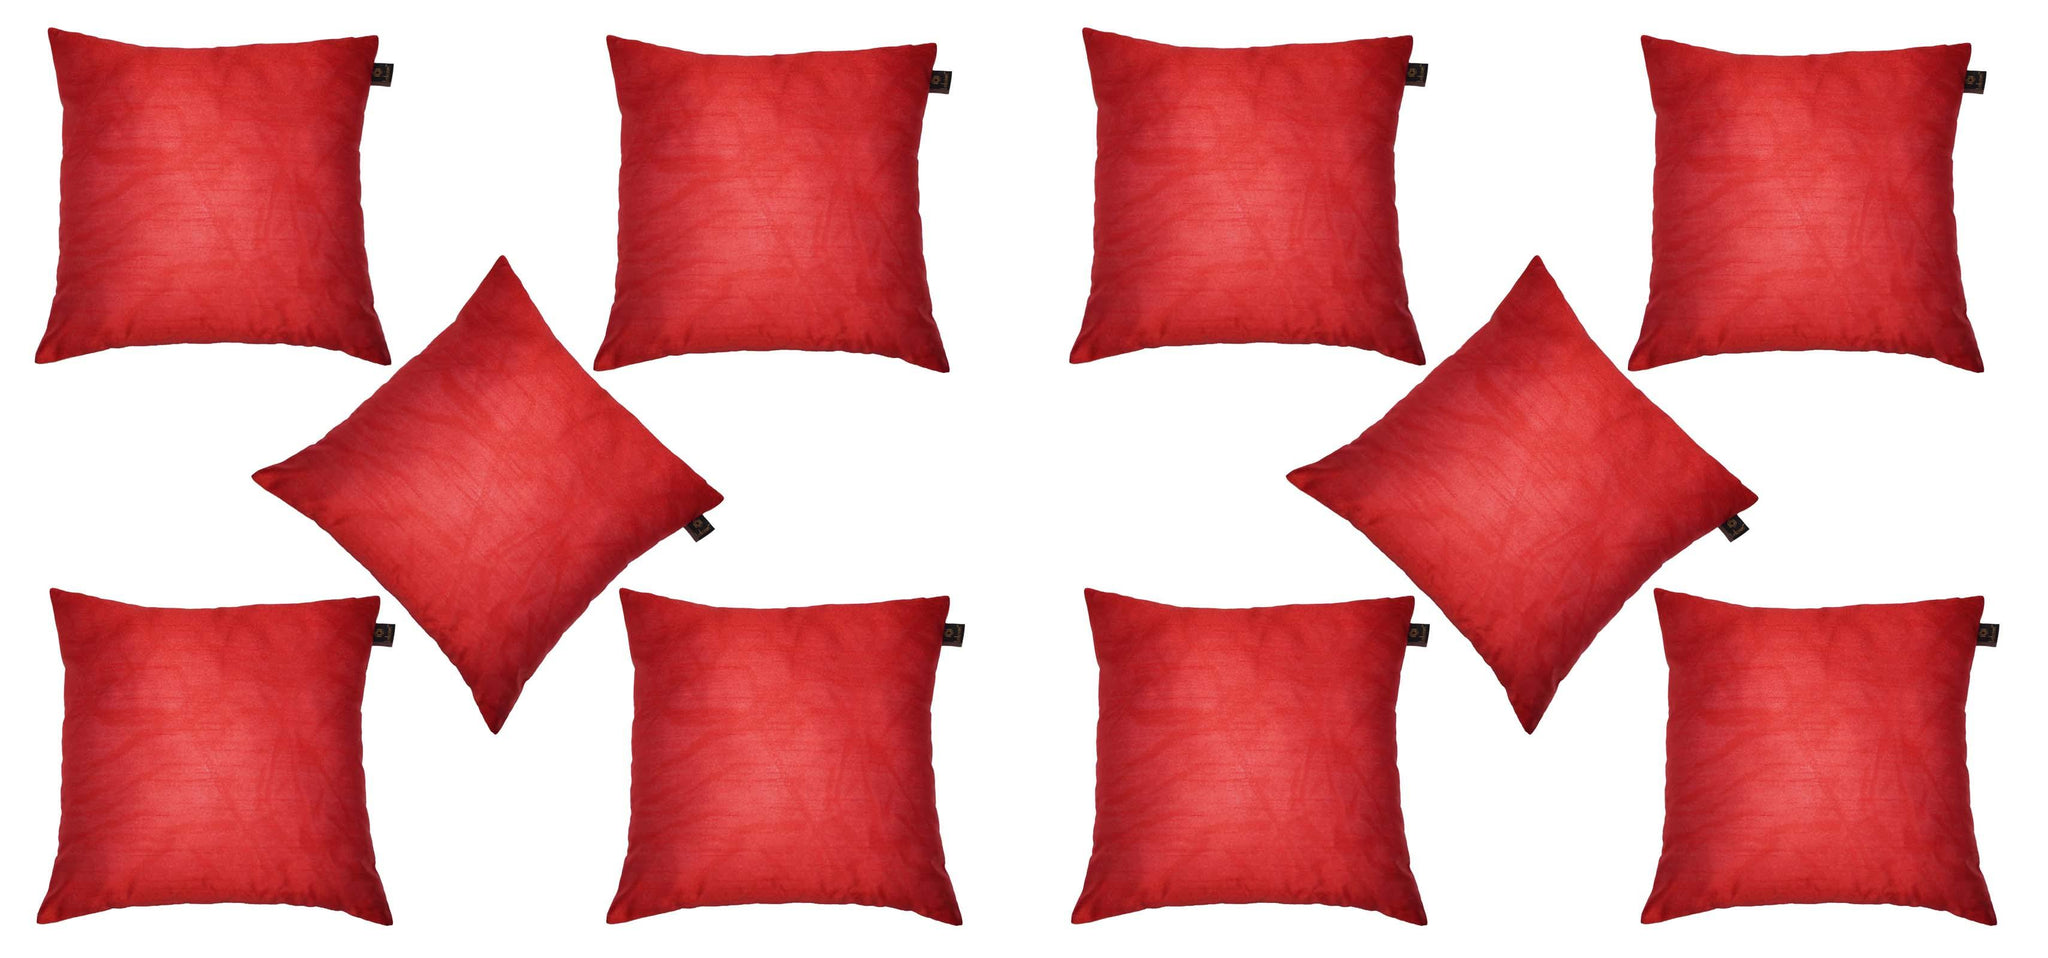 Lushomes Red Dupion Silk Cushion Covers (Pack of 10) - Lushomes